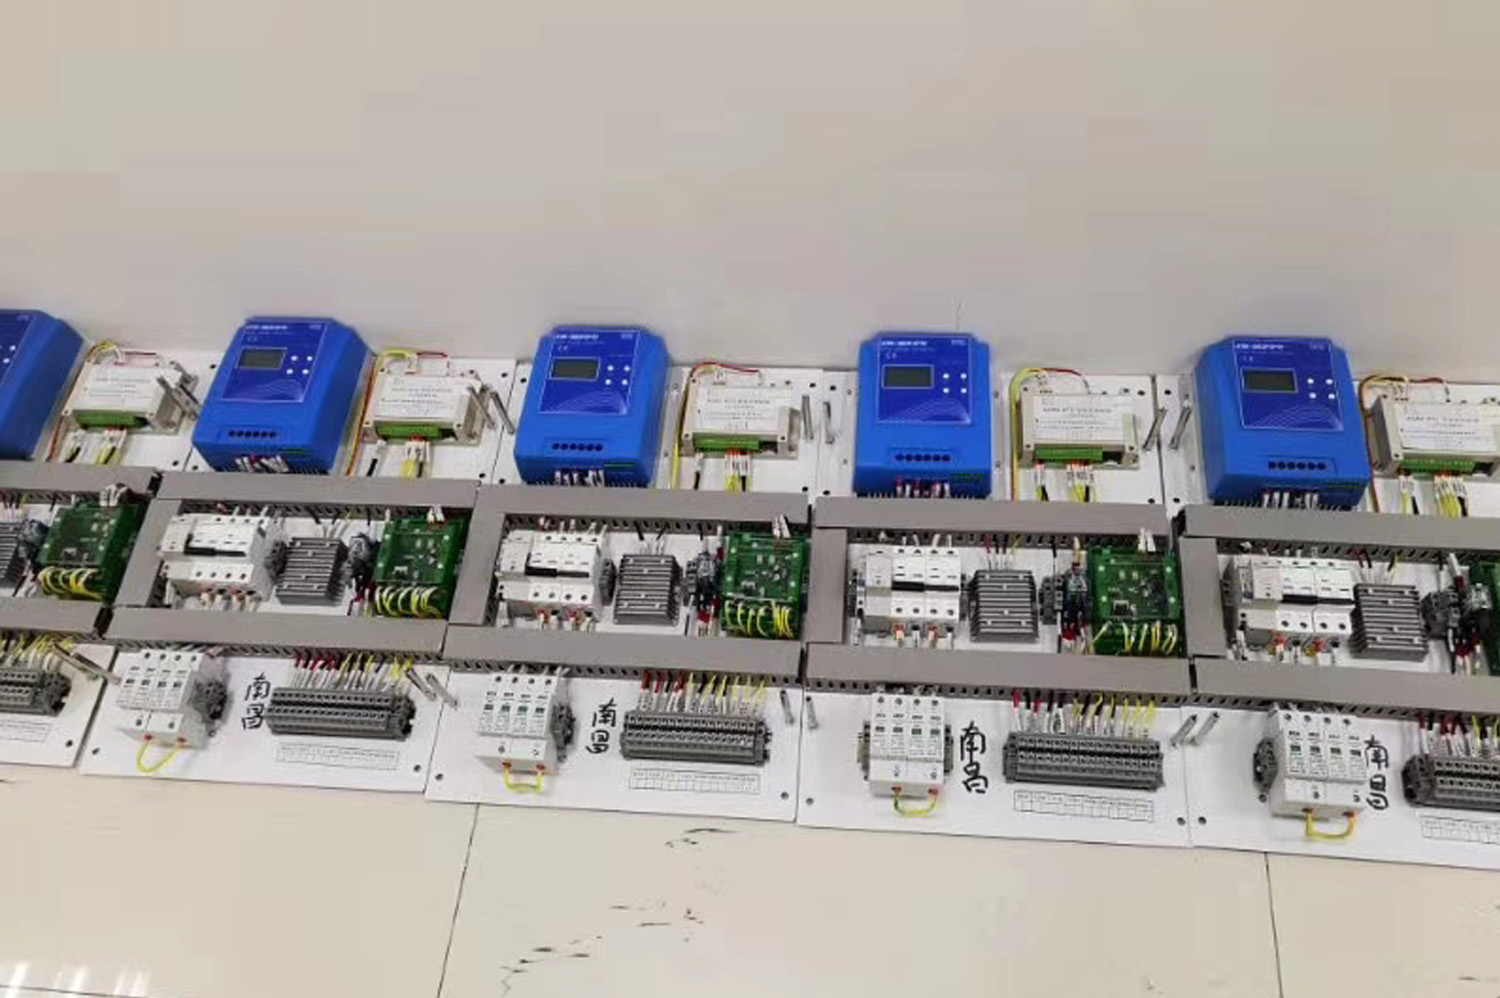 JN-MPPT-A MPPT solar controllers assembly demo